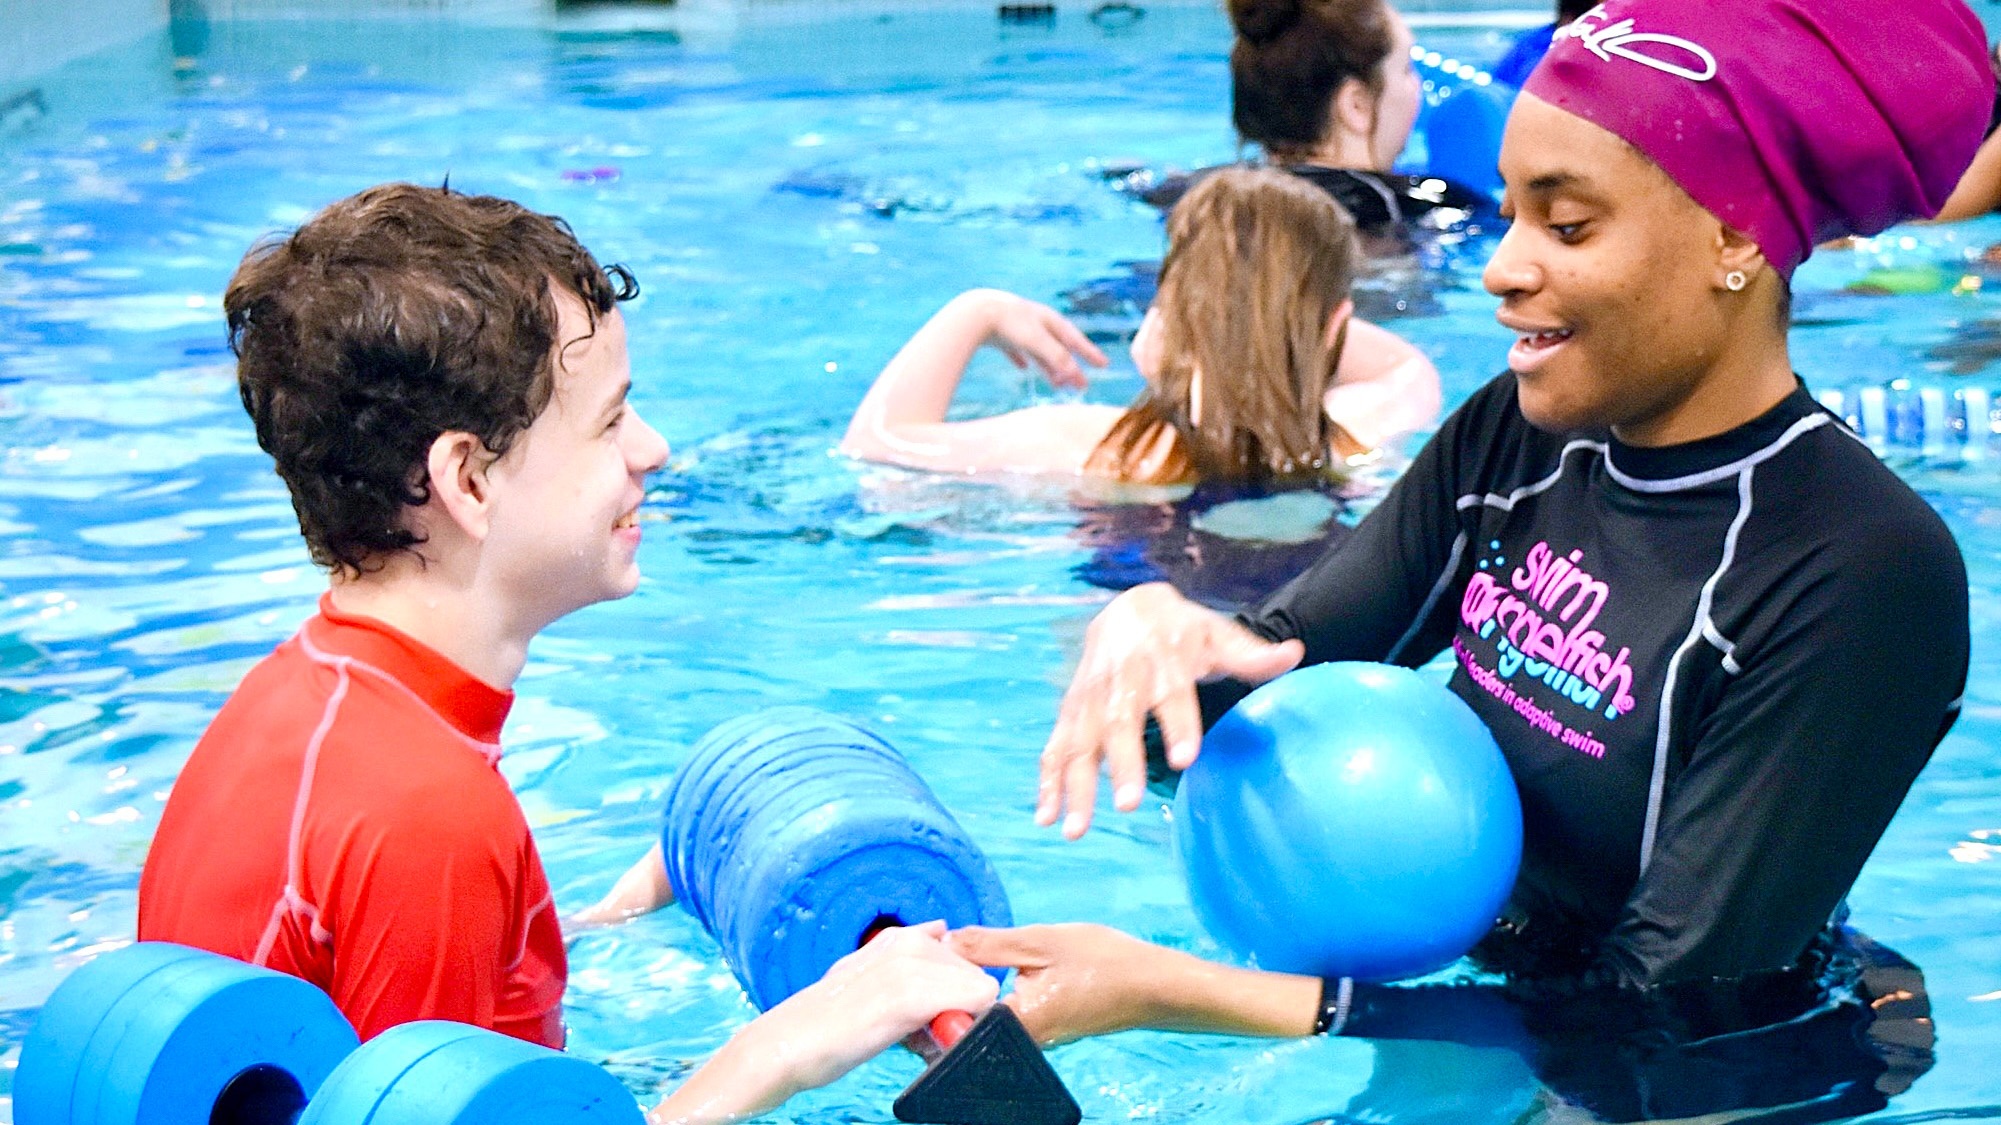 Aquatic Therapy Helps Children with Autism